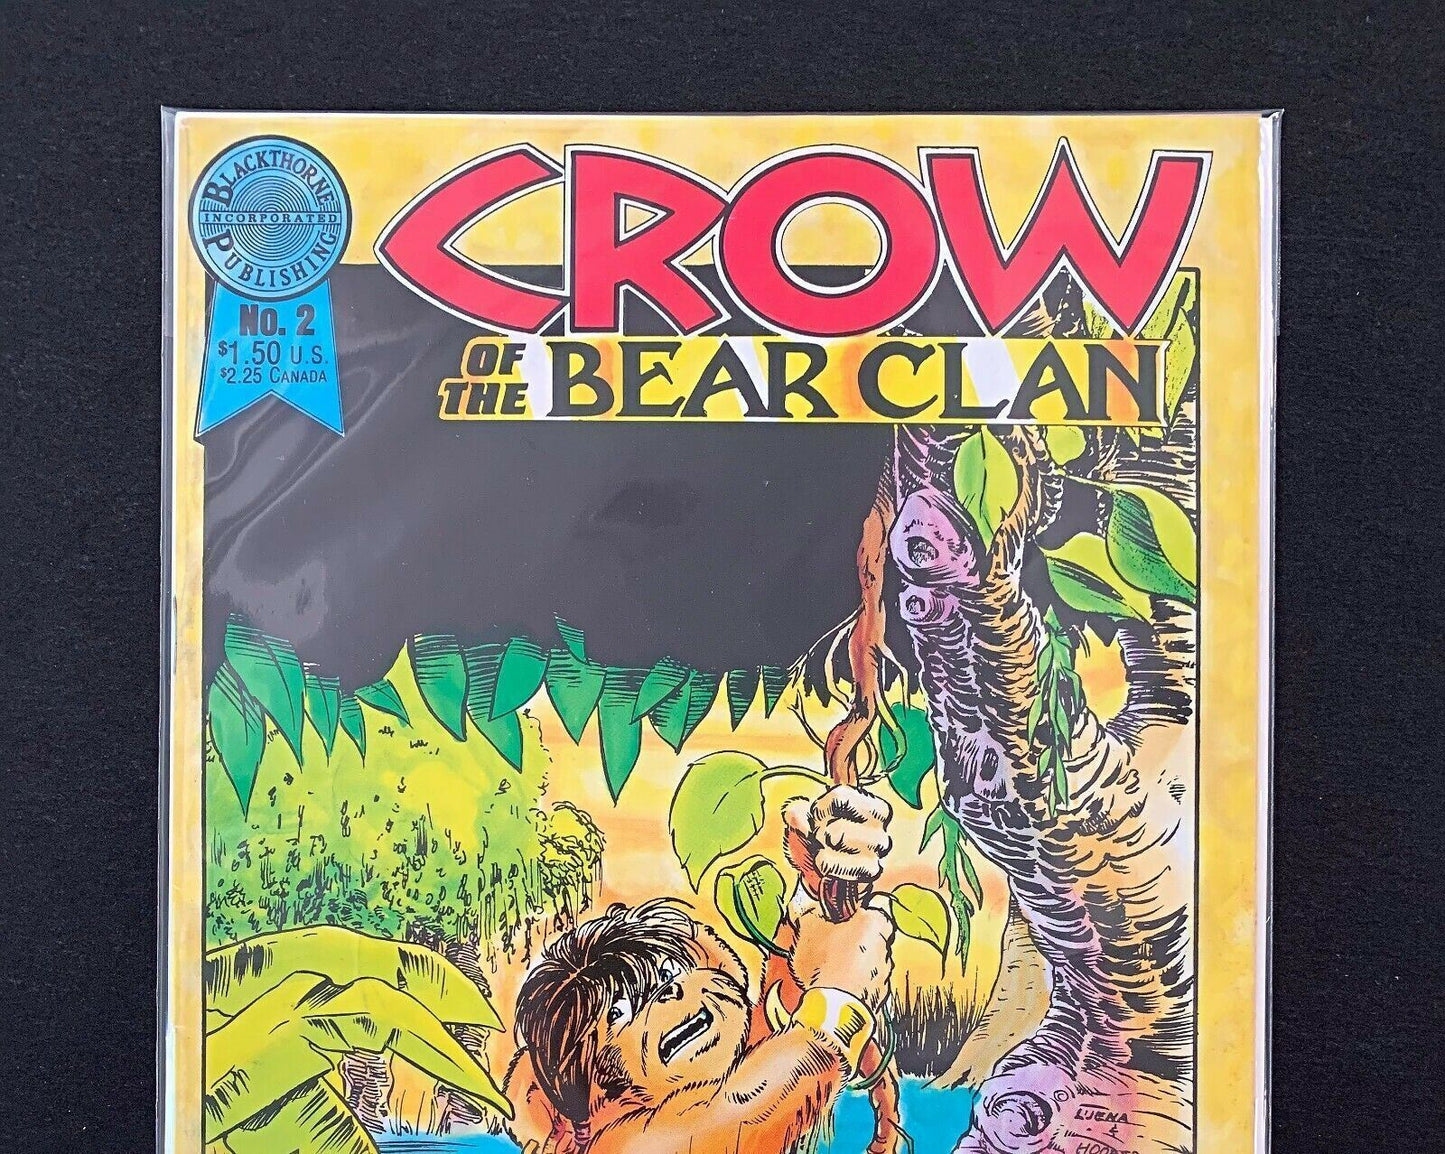 Crow Of The Bear Clan #2 Blackthorne Publishing 1986 Vf+